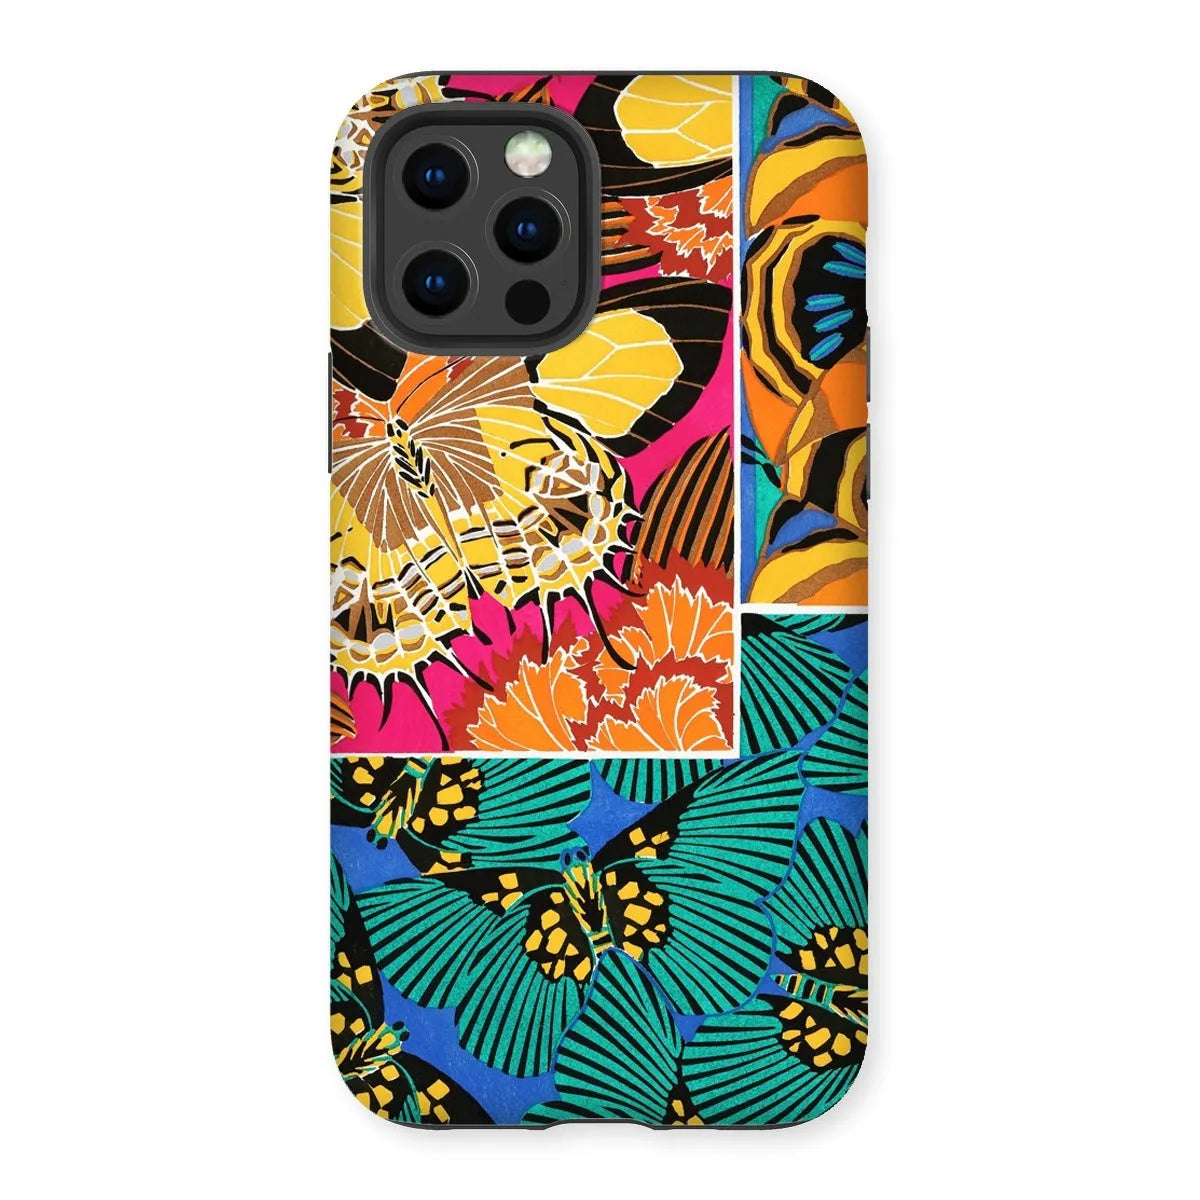 Rainbow Butterfly Aesthetic Art Phone Case - E.a. Seguy - Iphone 12 Pro / Matte - Mobile Phone Cases - Aesthetic Art